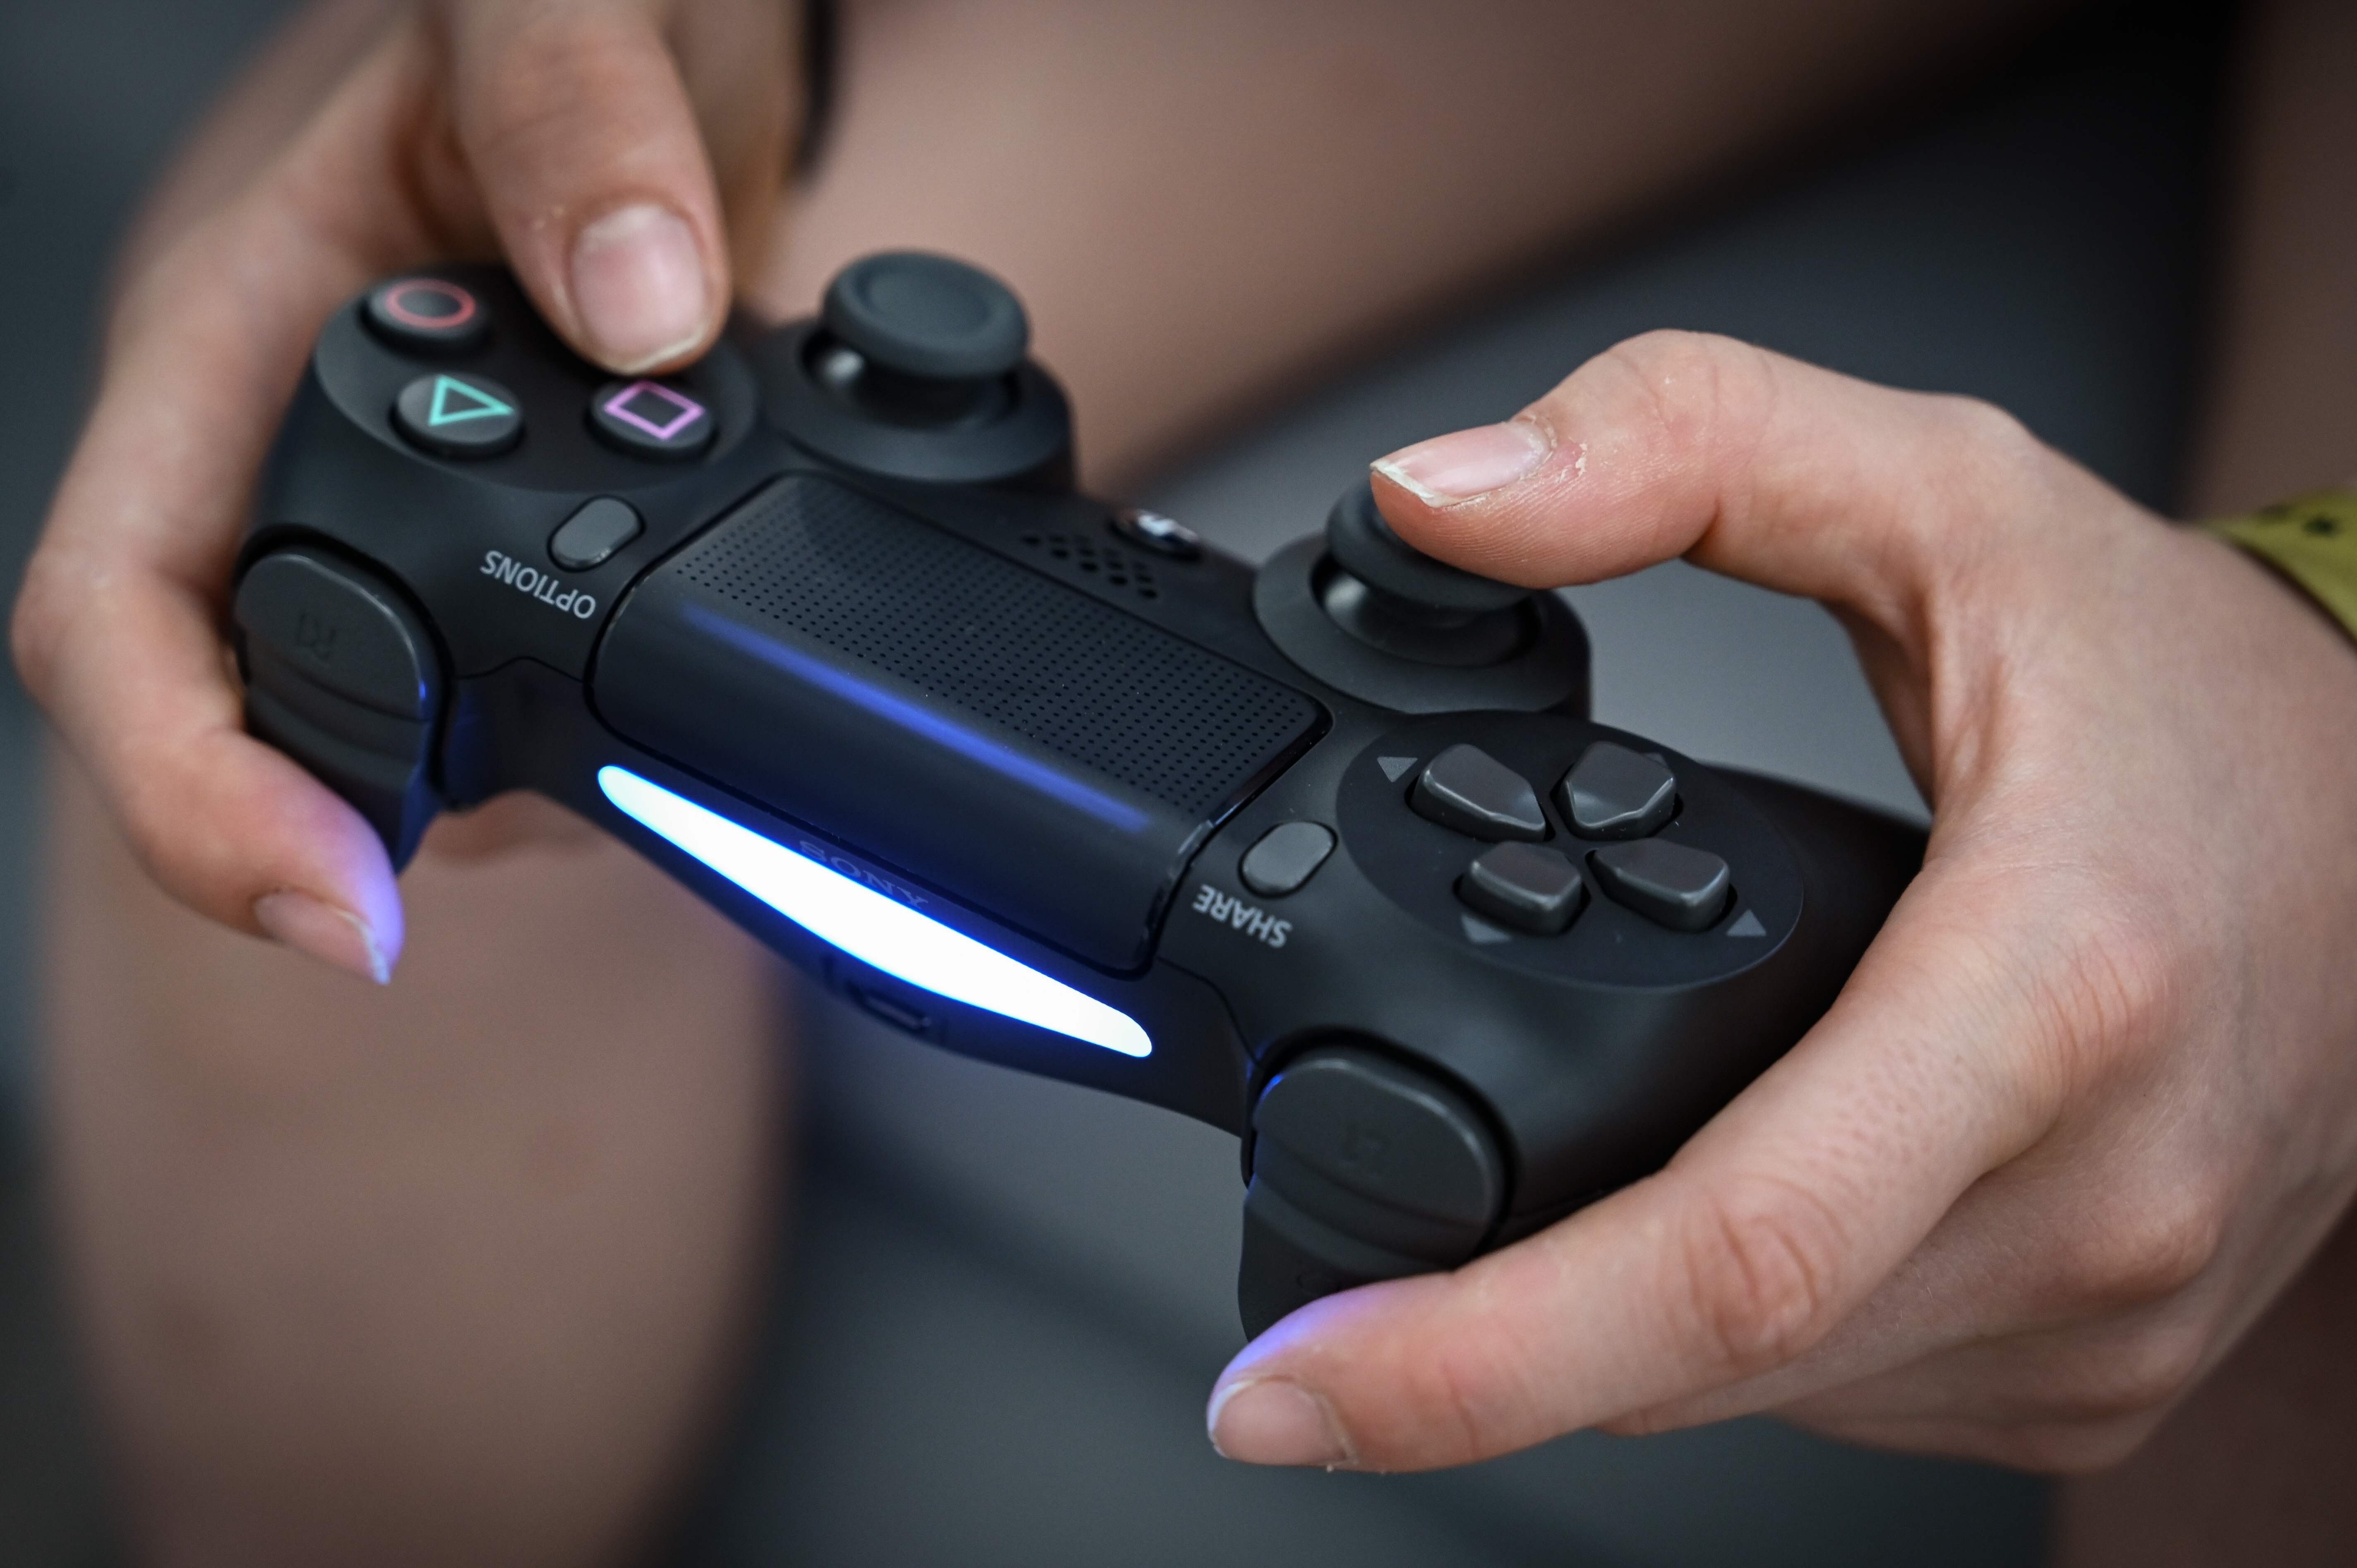 Online games can help to improve cognitive skills such as attention and focus, spatial reasoning and visual processing, as well hand-eye coordination. Photo: AFP